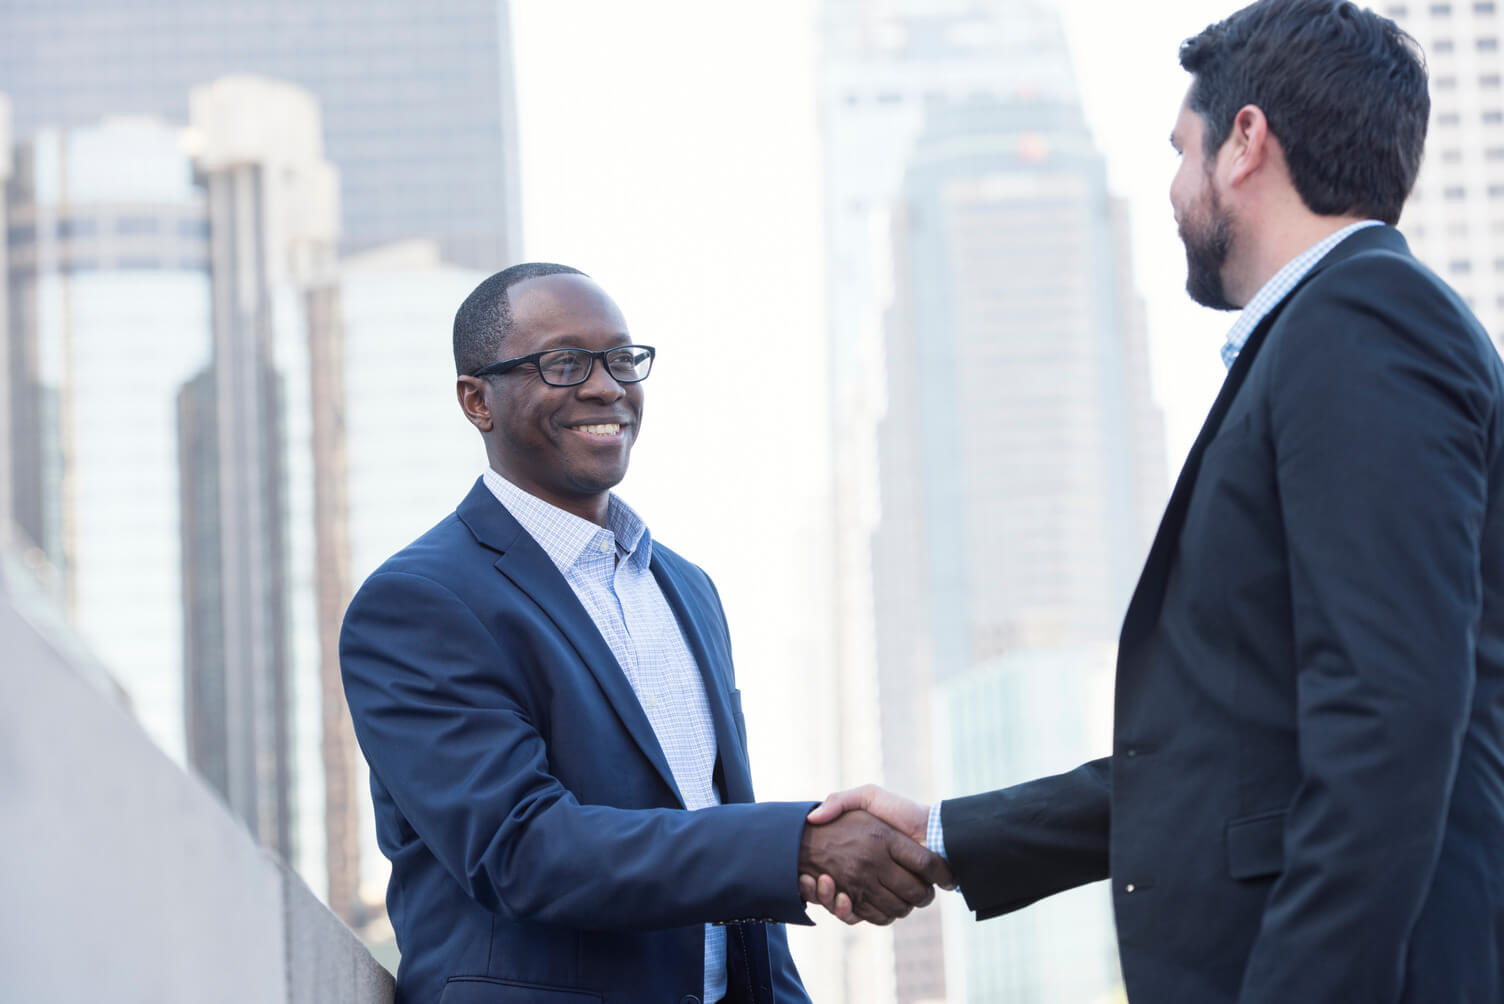 Black man in a suit is shaking hands with a white man in a suit